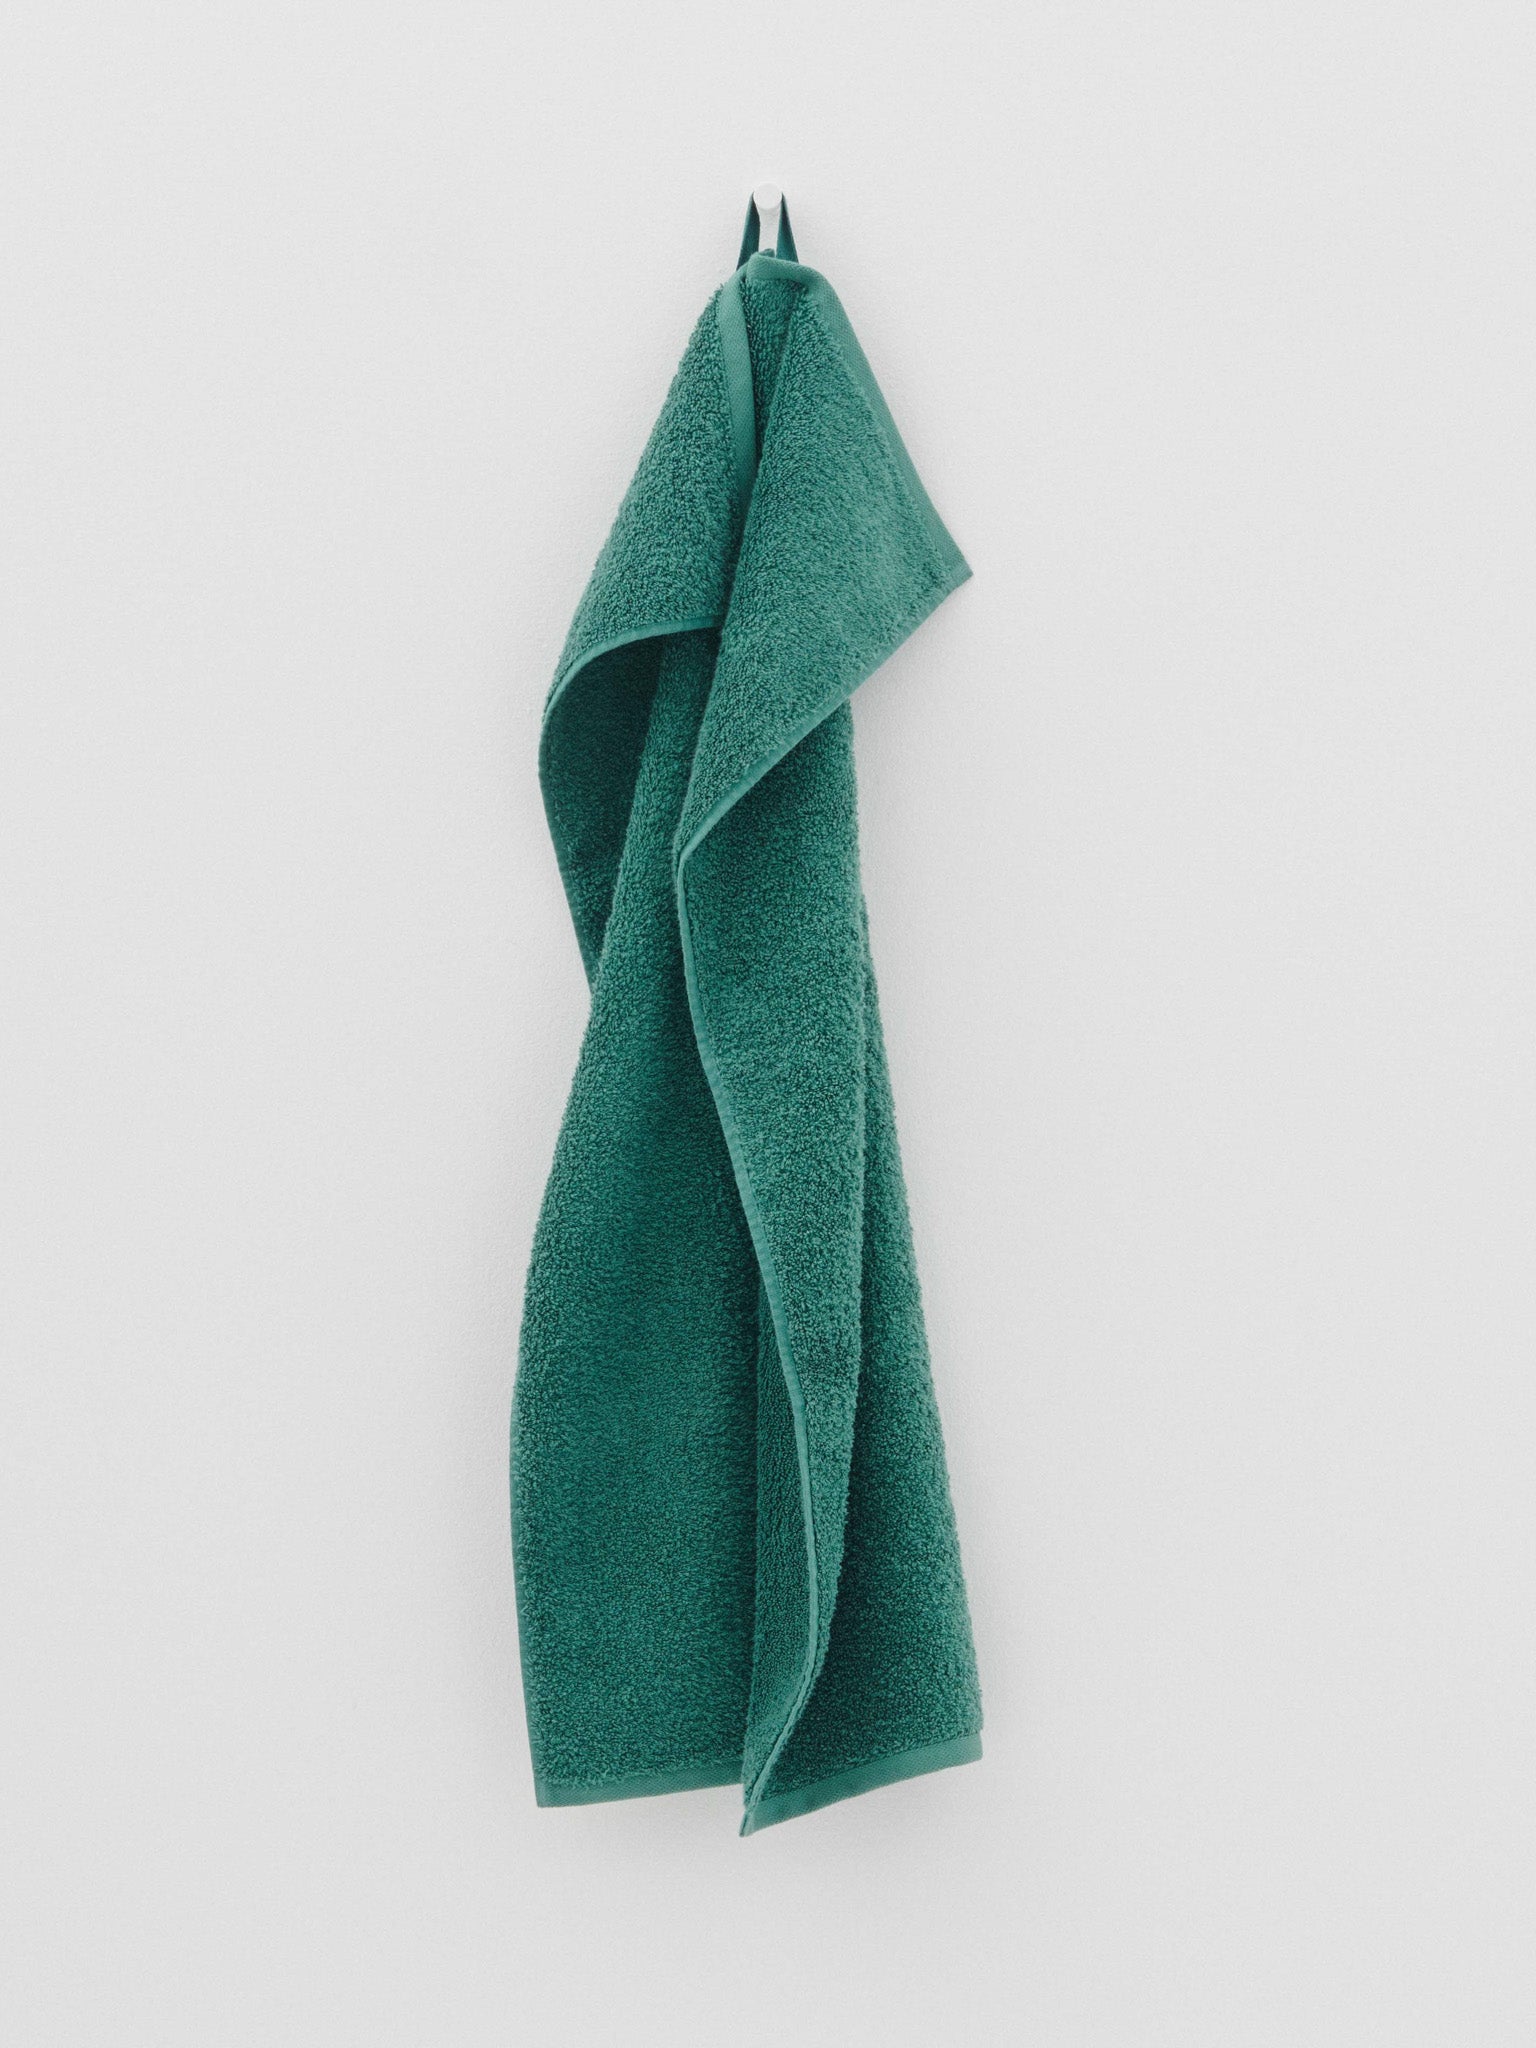 Hand Towel in Teal Green